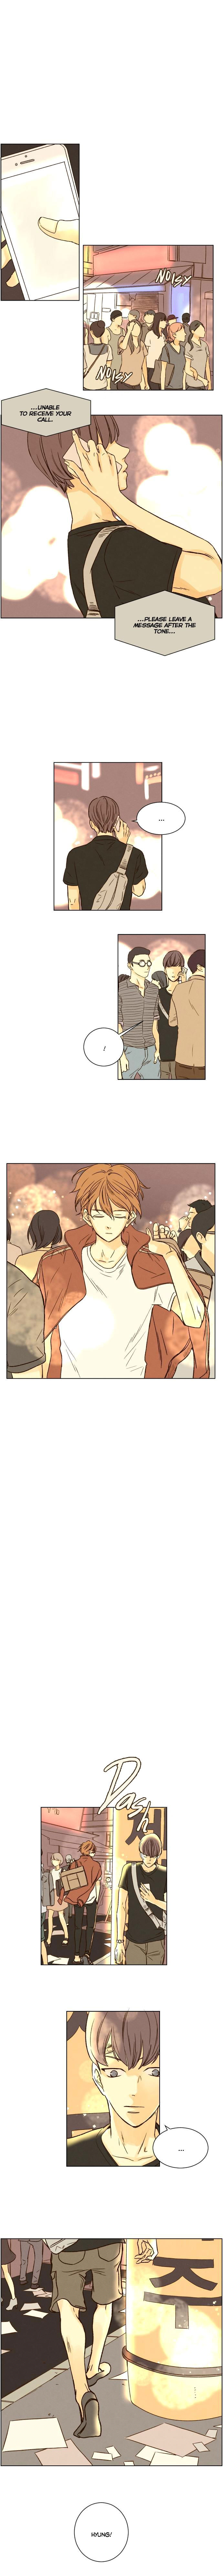 That Summer (KIM Hyun) Chapter 024 page 2